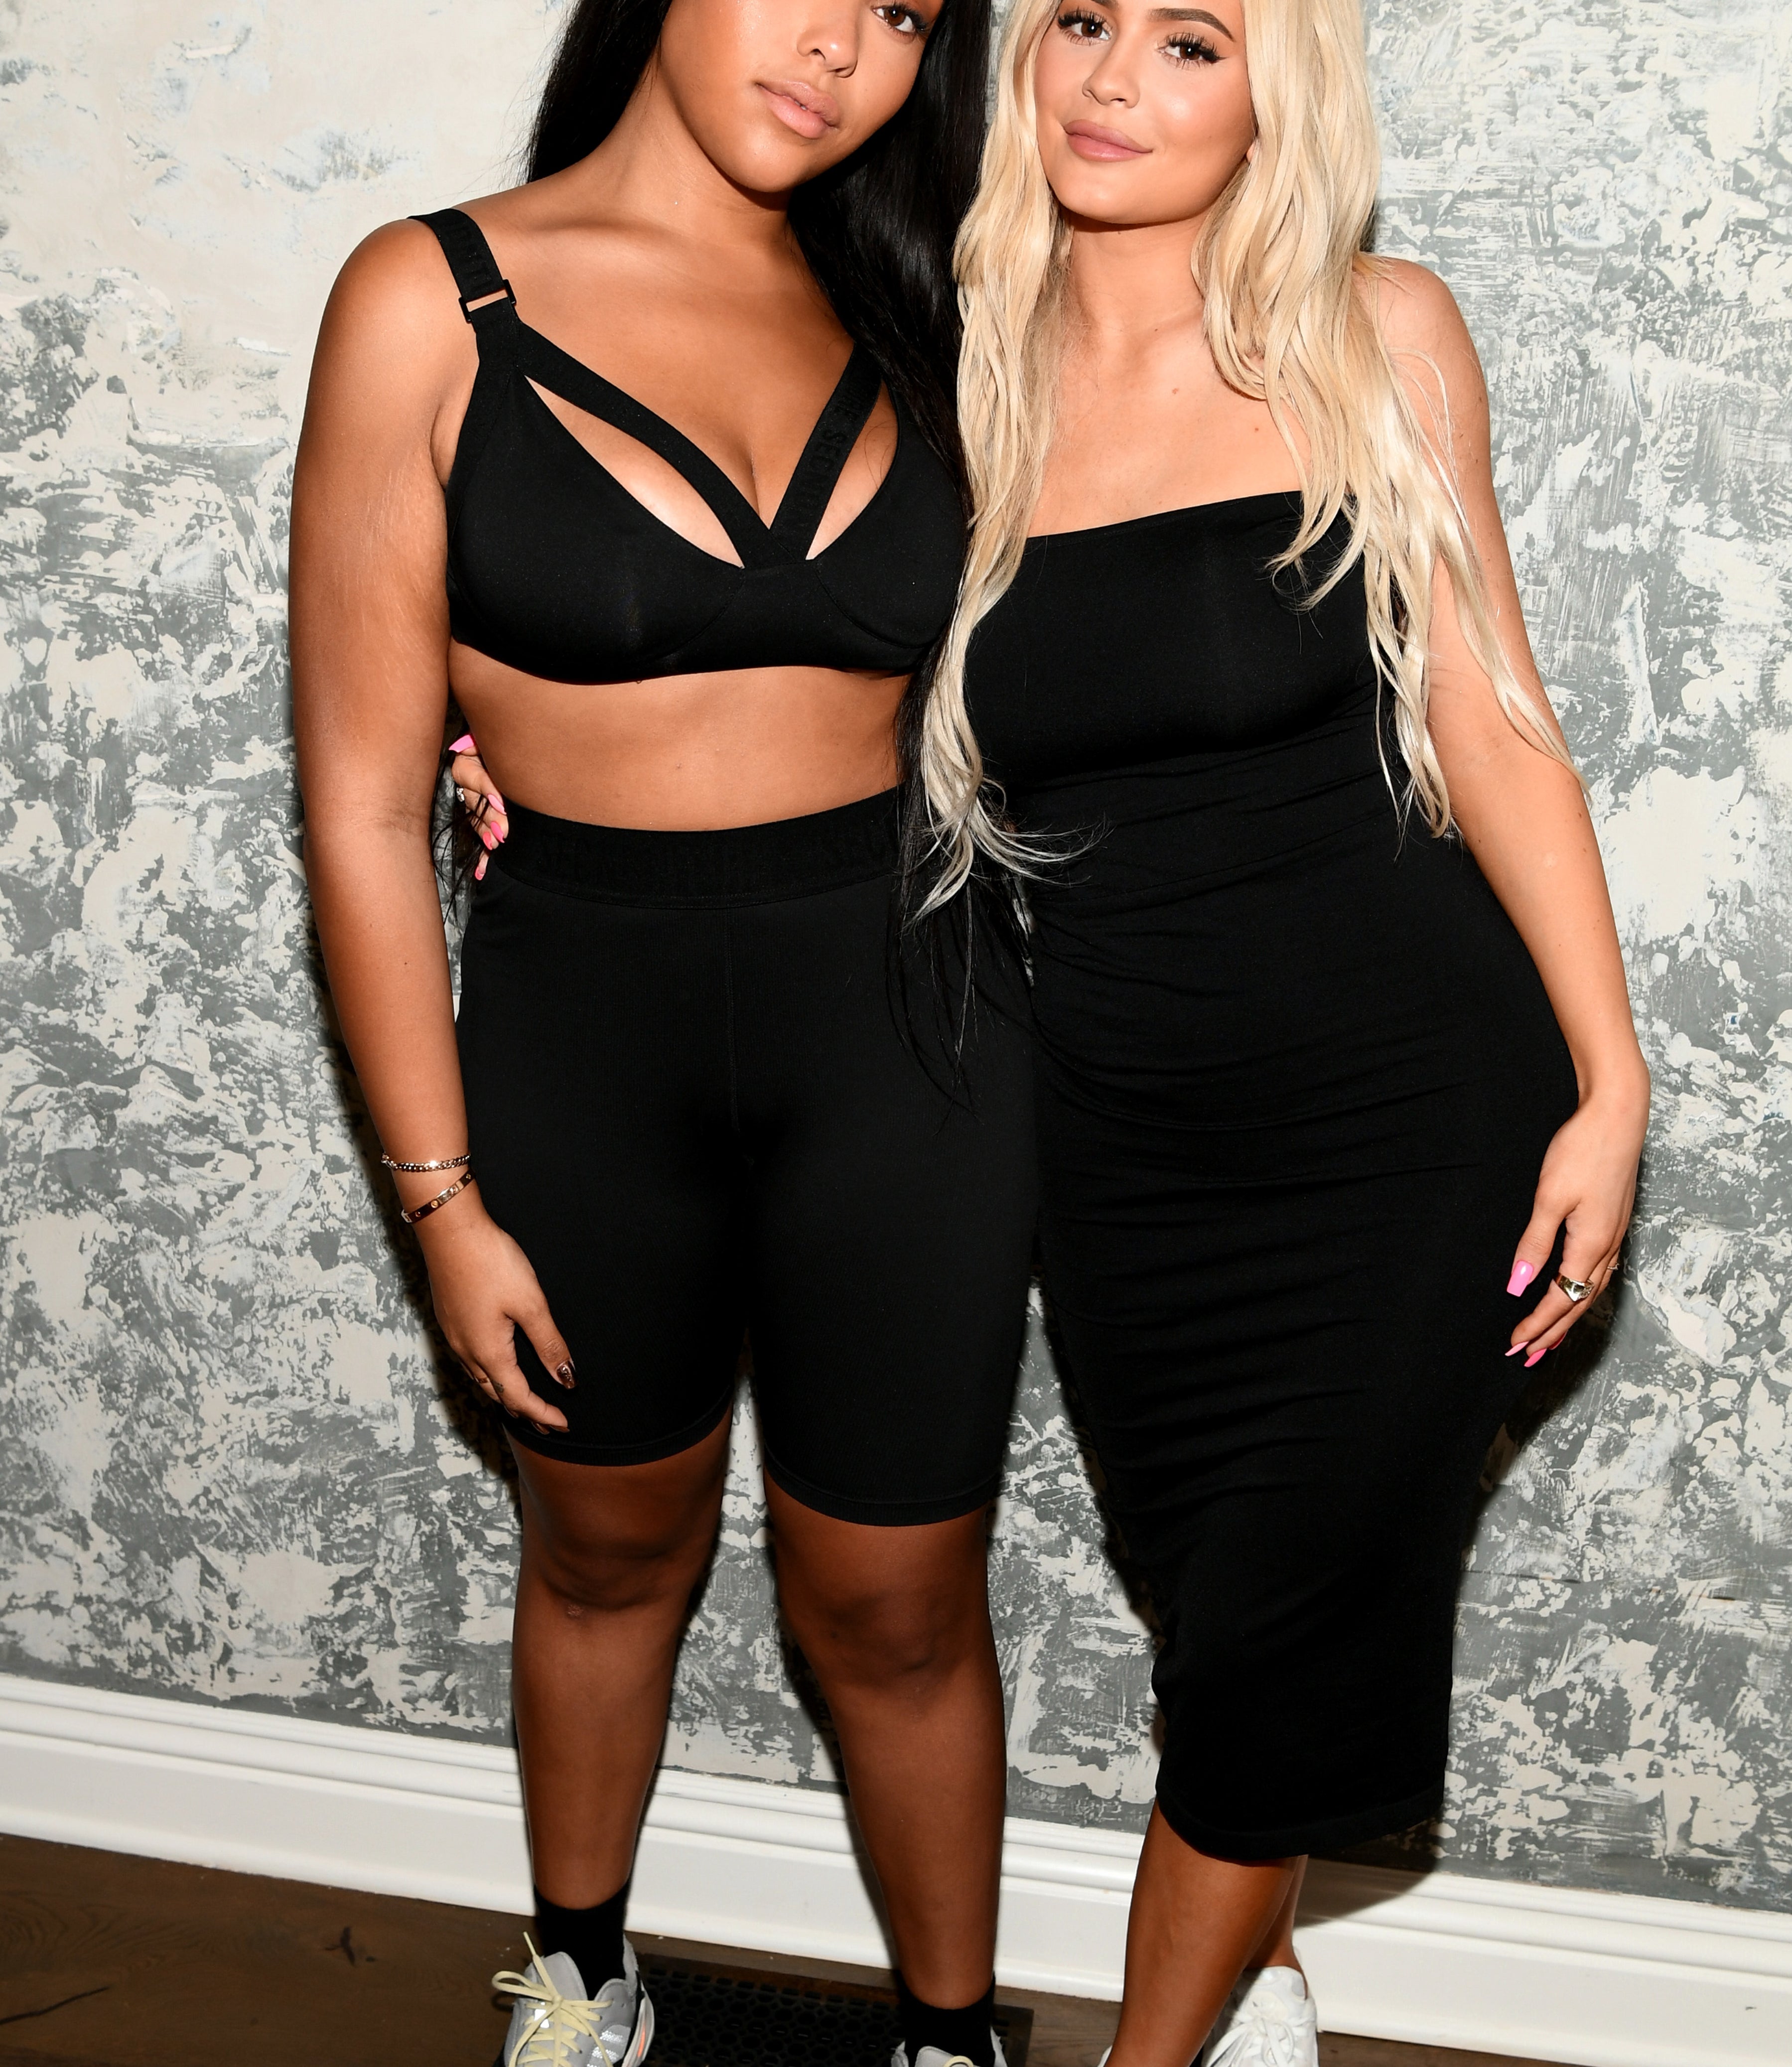 Closeup of Jordyn Woods and Kylie Jenner